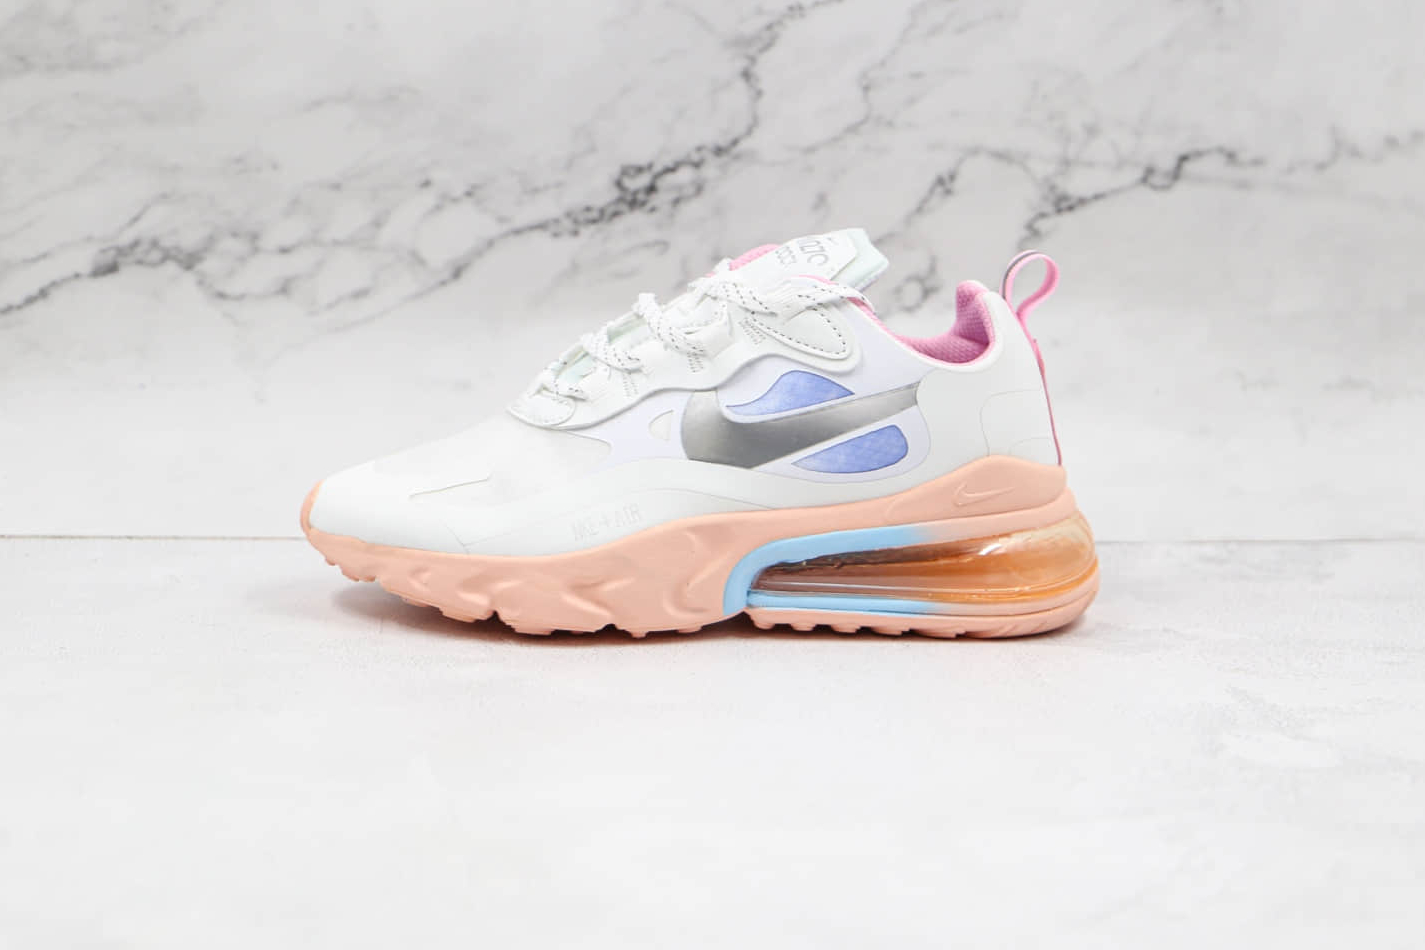 Nike Air Max 270 White Washed Coral Hyper Blue Sneakers CZ8131-100